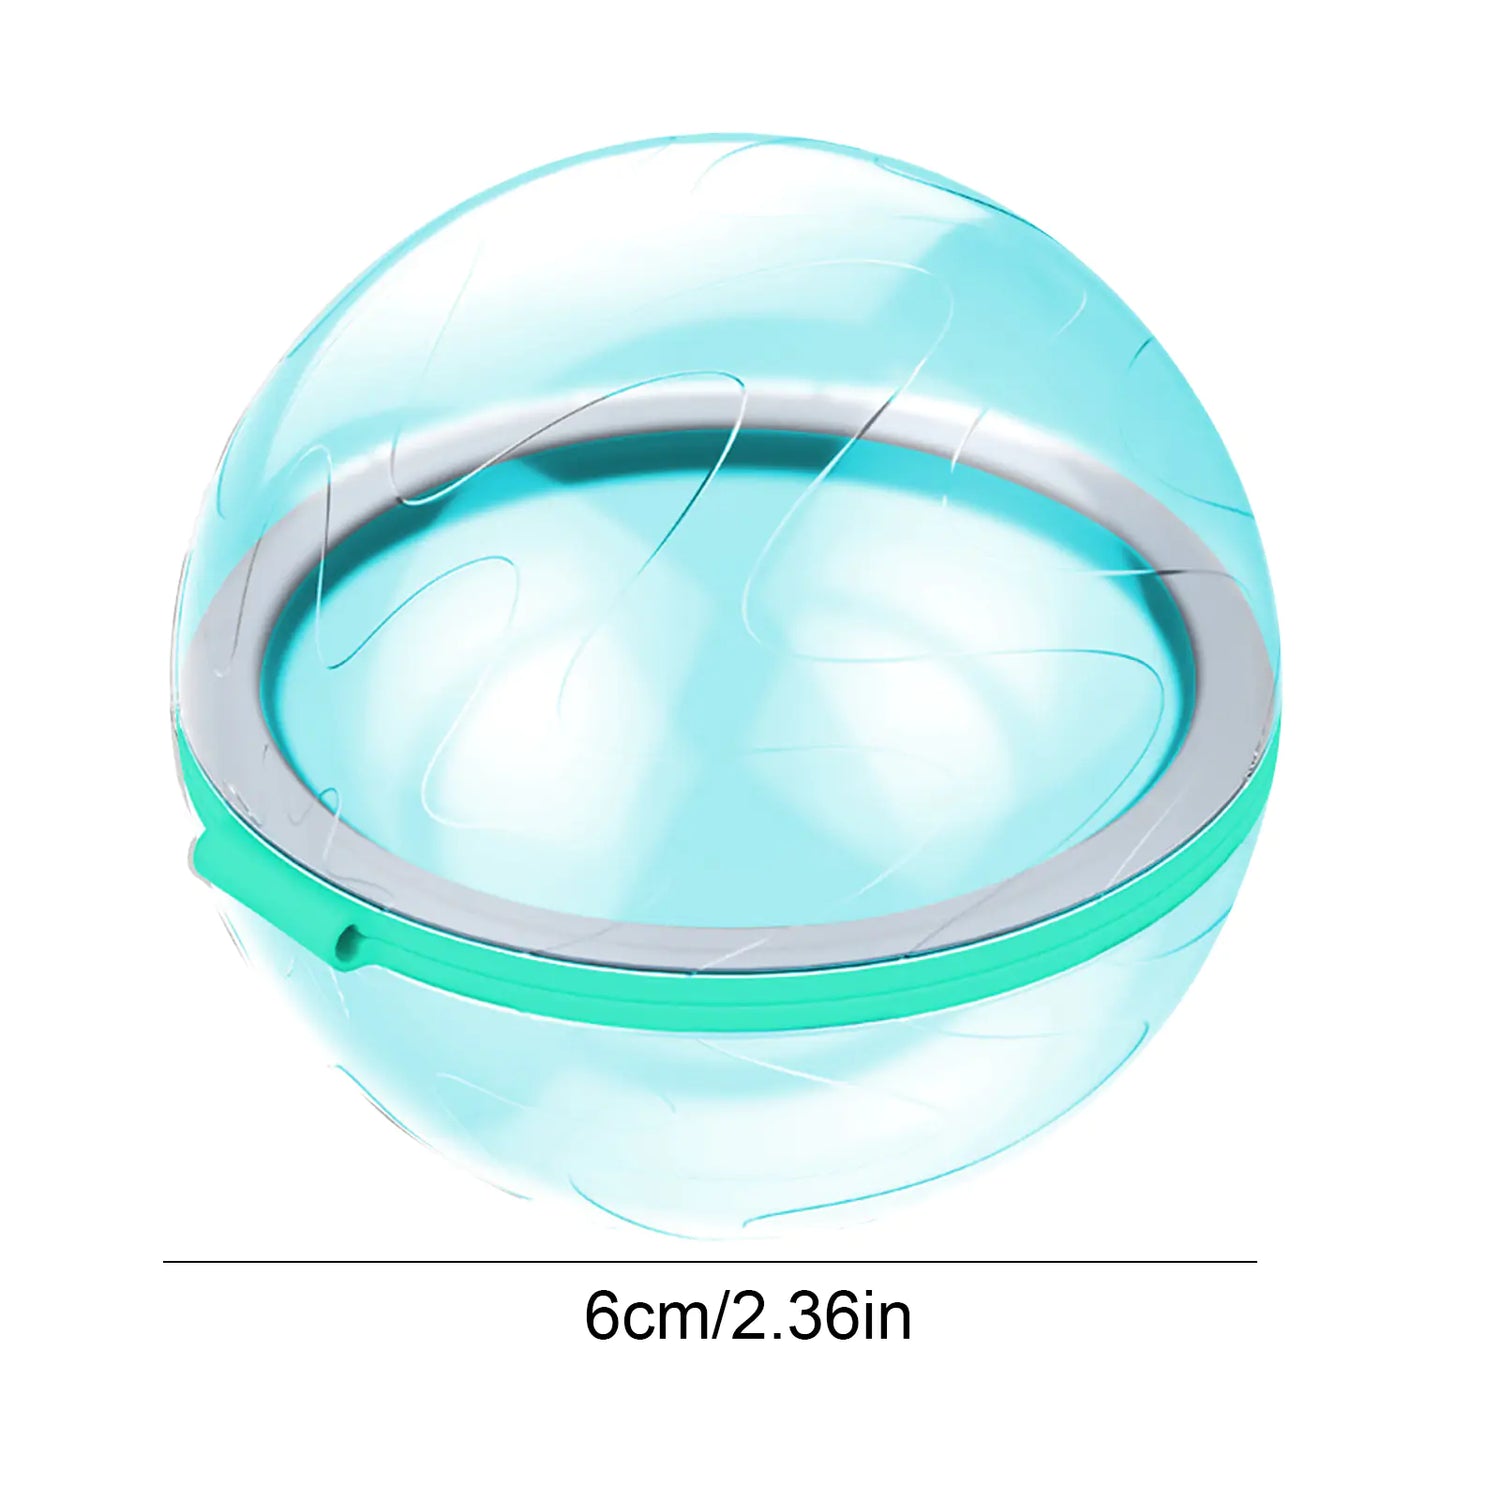 Water Ball Toy